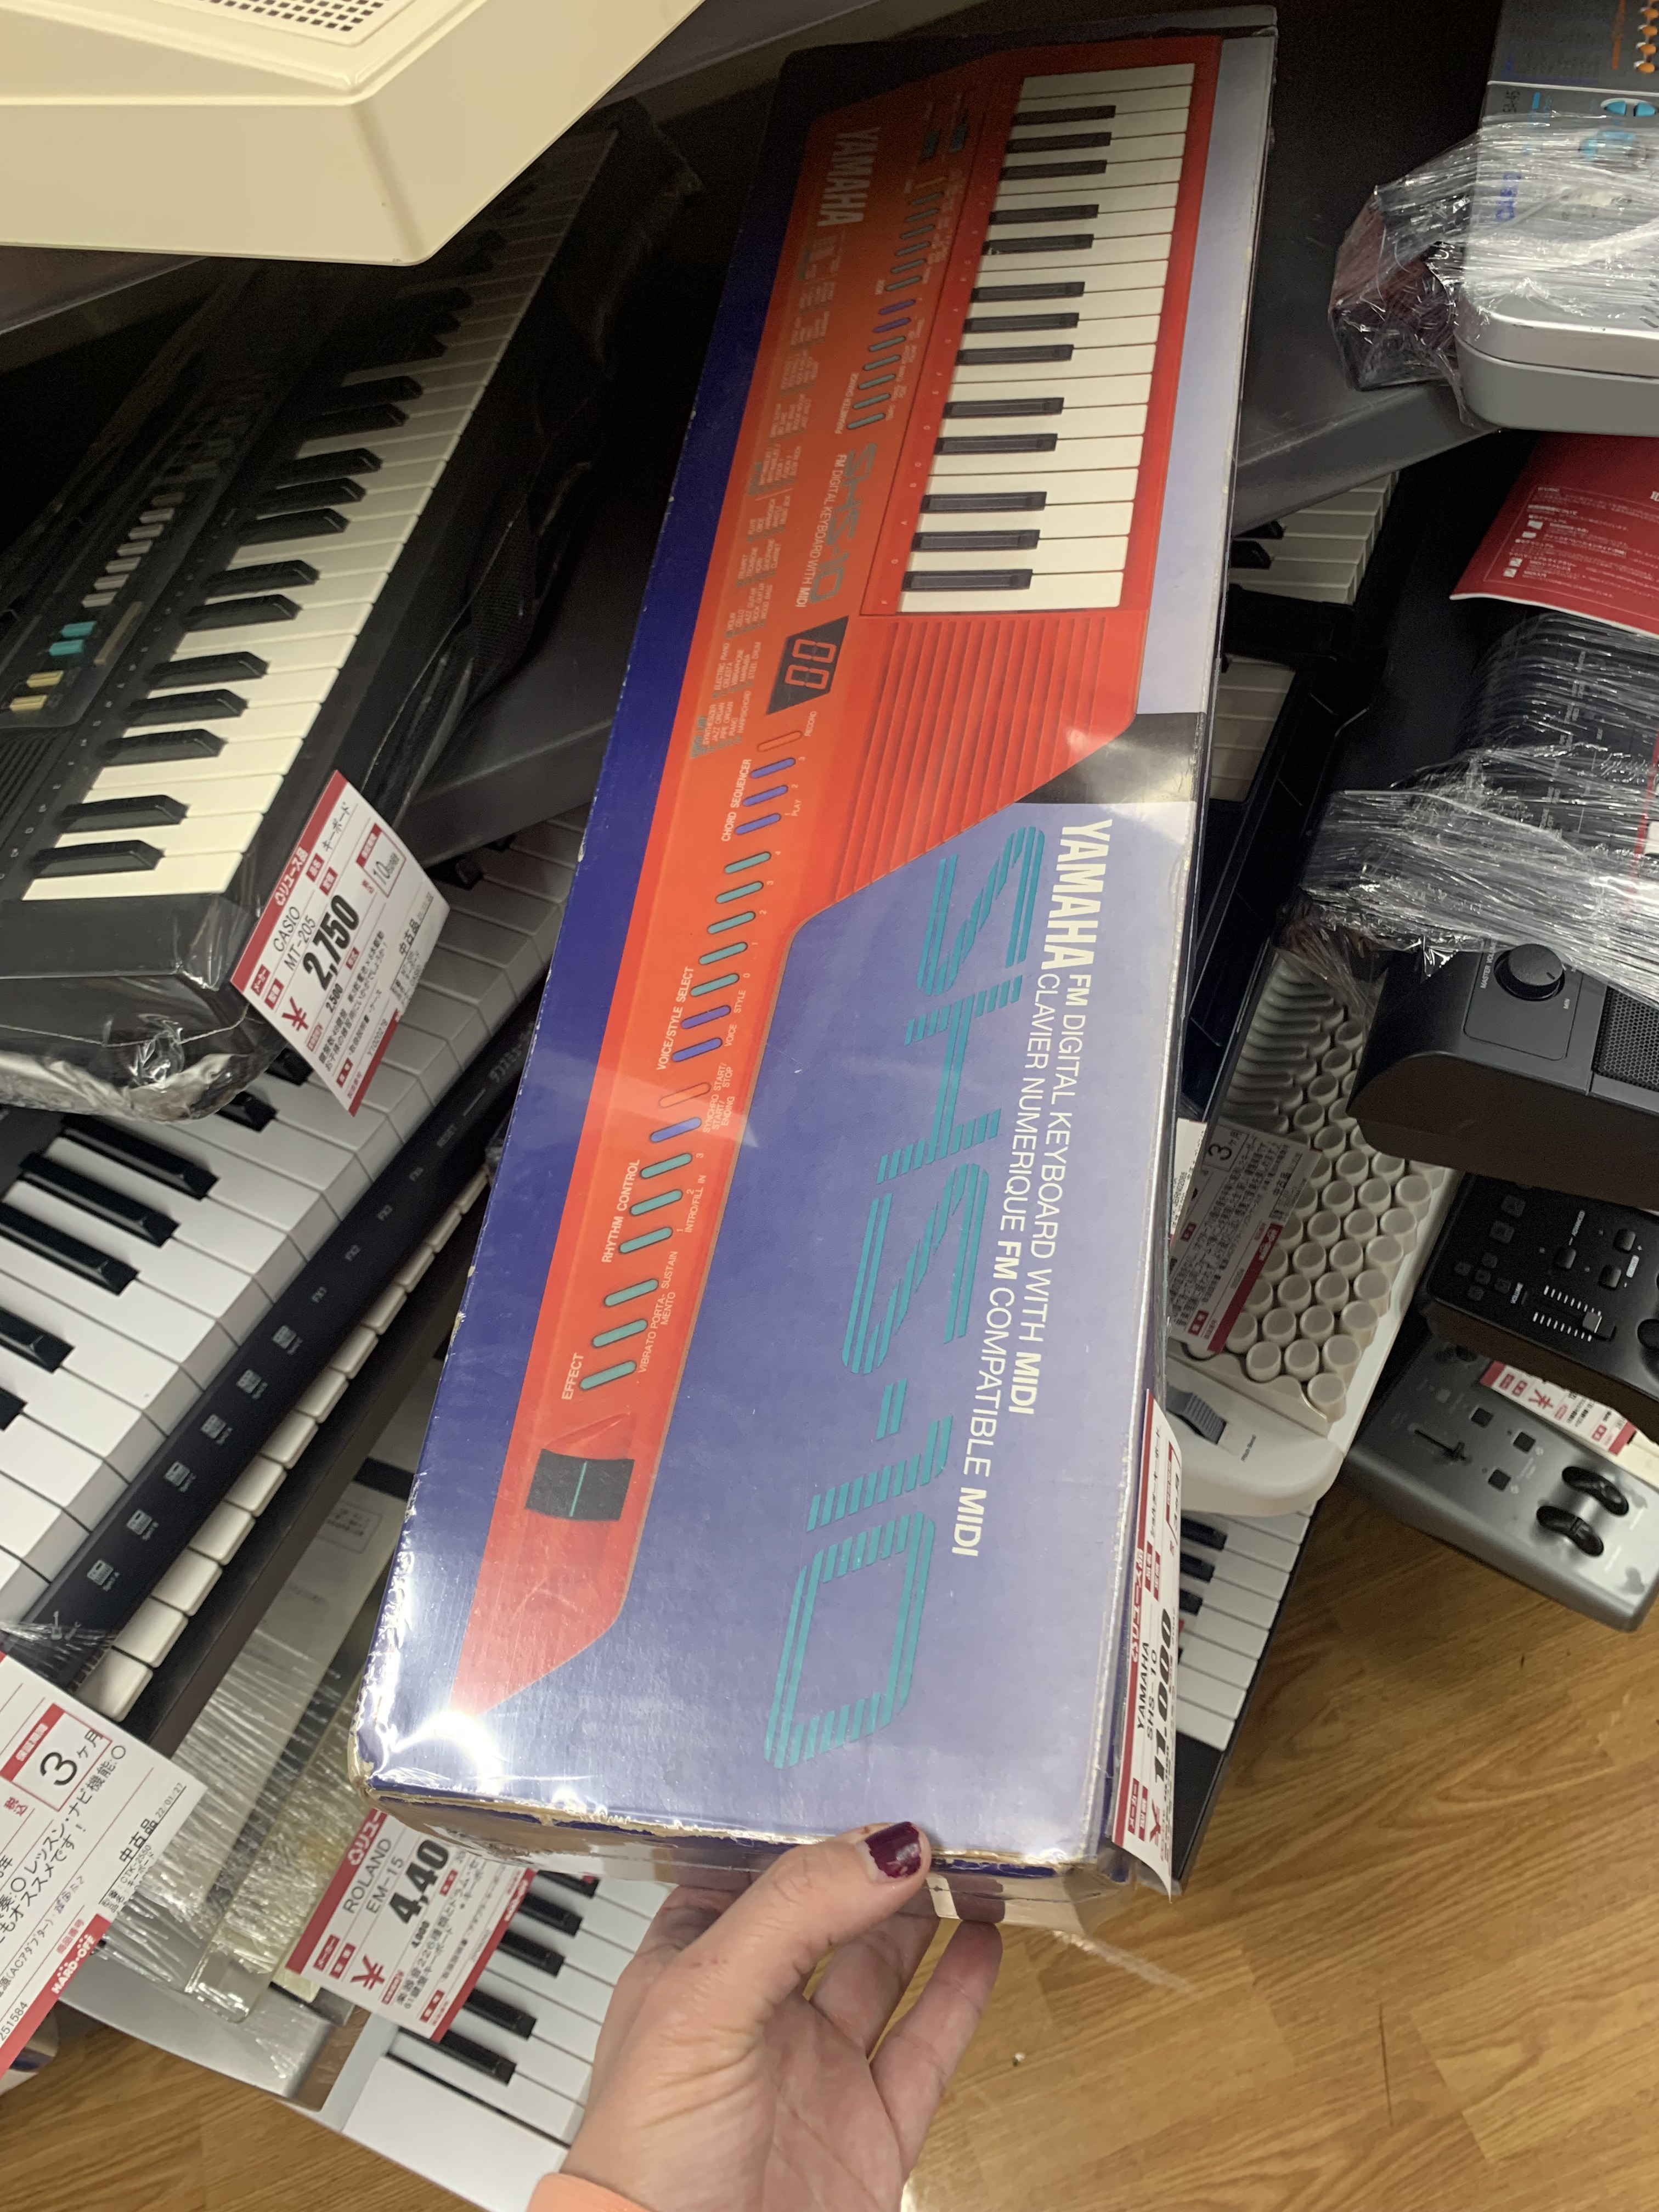 A red Key-tar in original packaging for sale at a second hand store in Tokyo. Photo by Denisse Rauda.